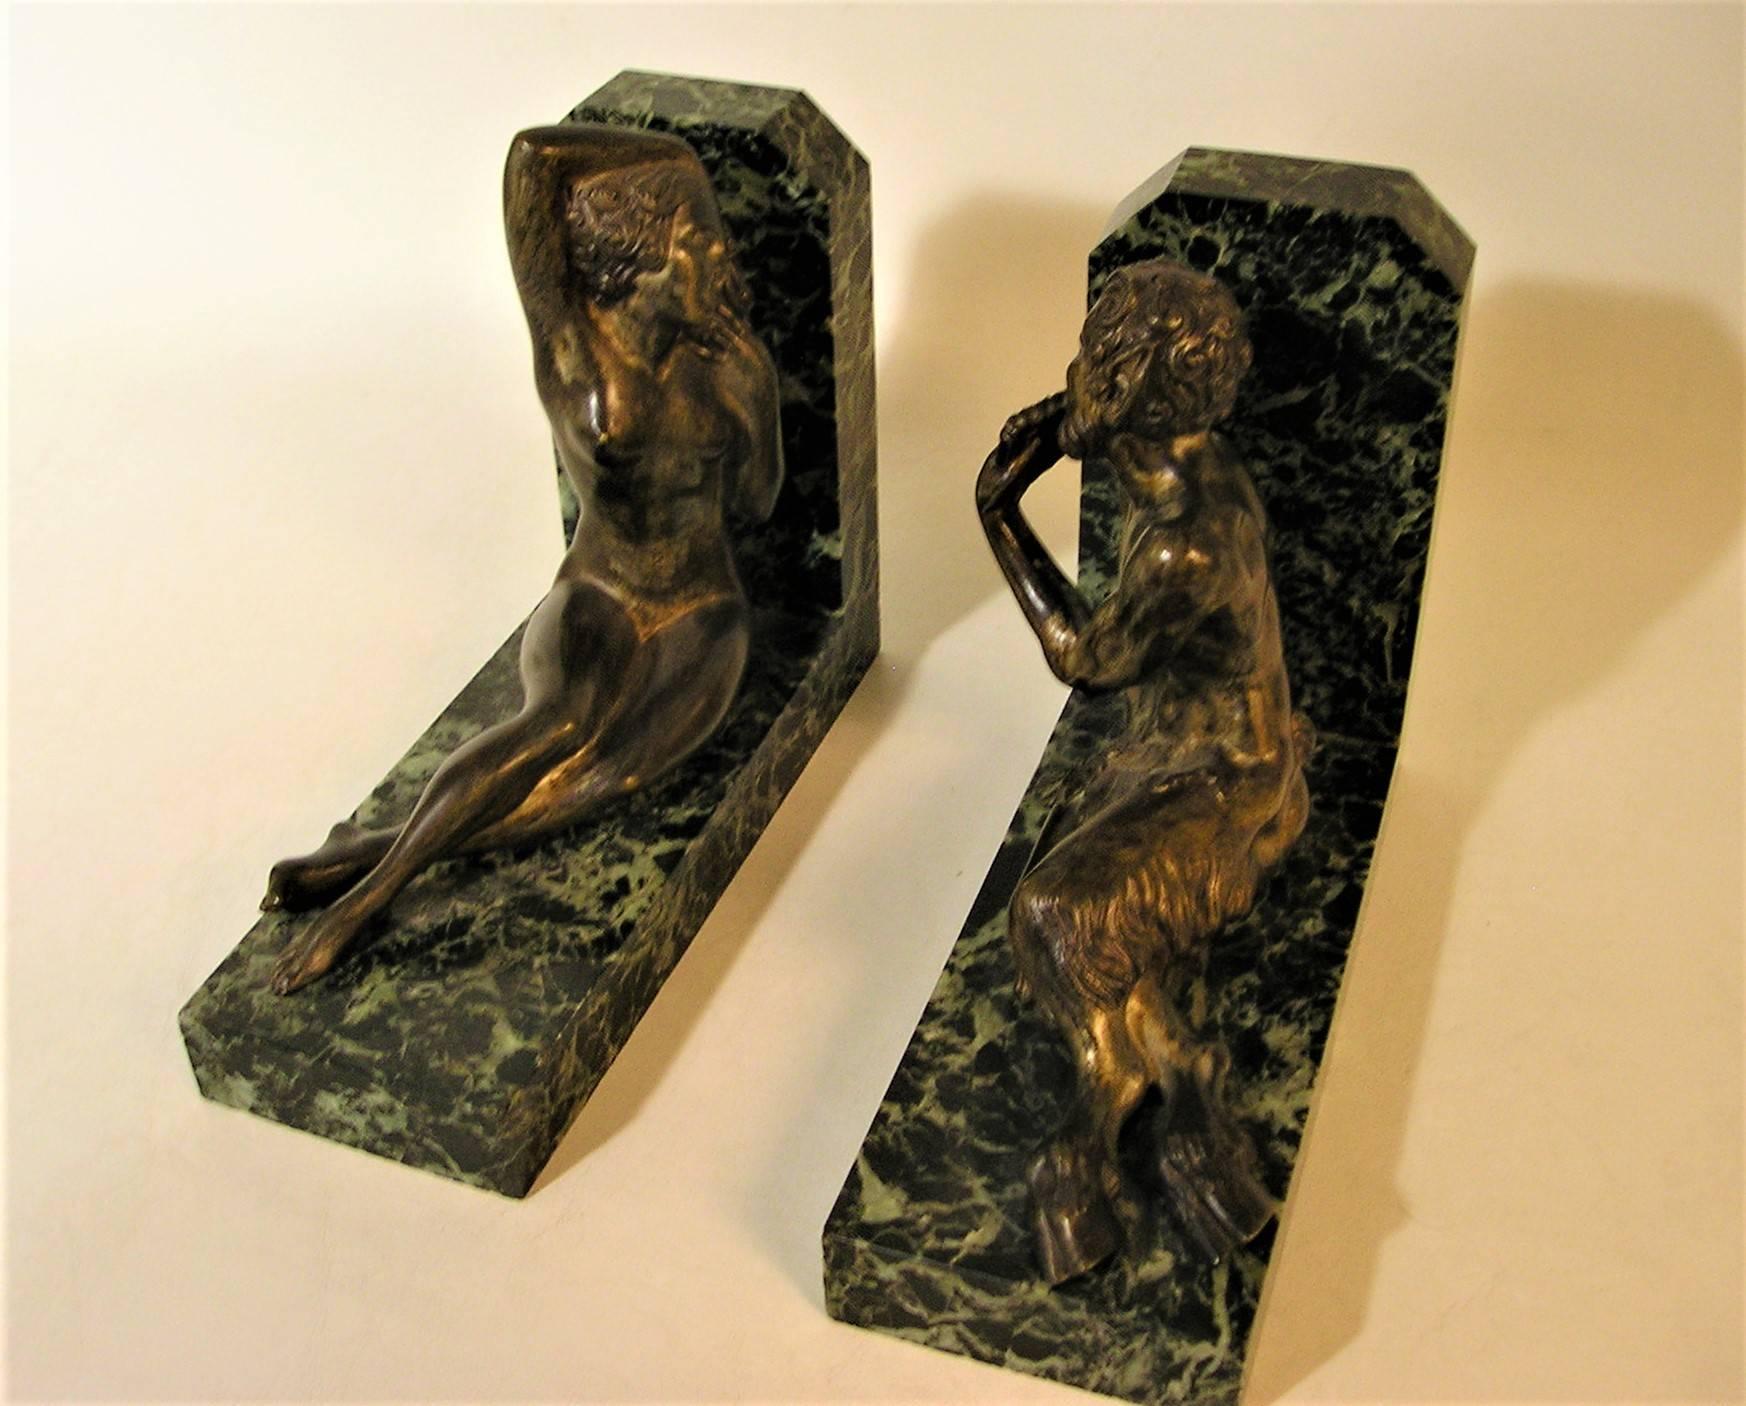 20th Century French Art Deco Figural Bookends with Marble and Greek Mythological Figures